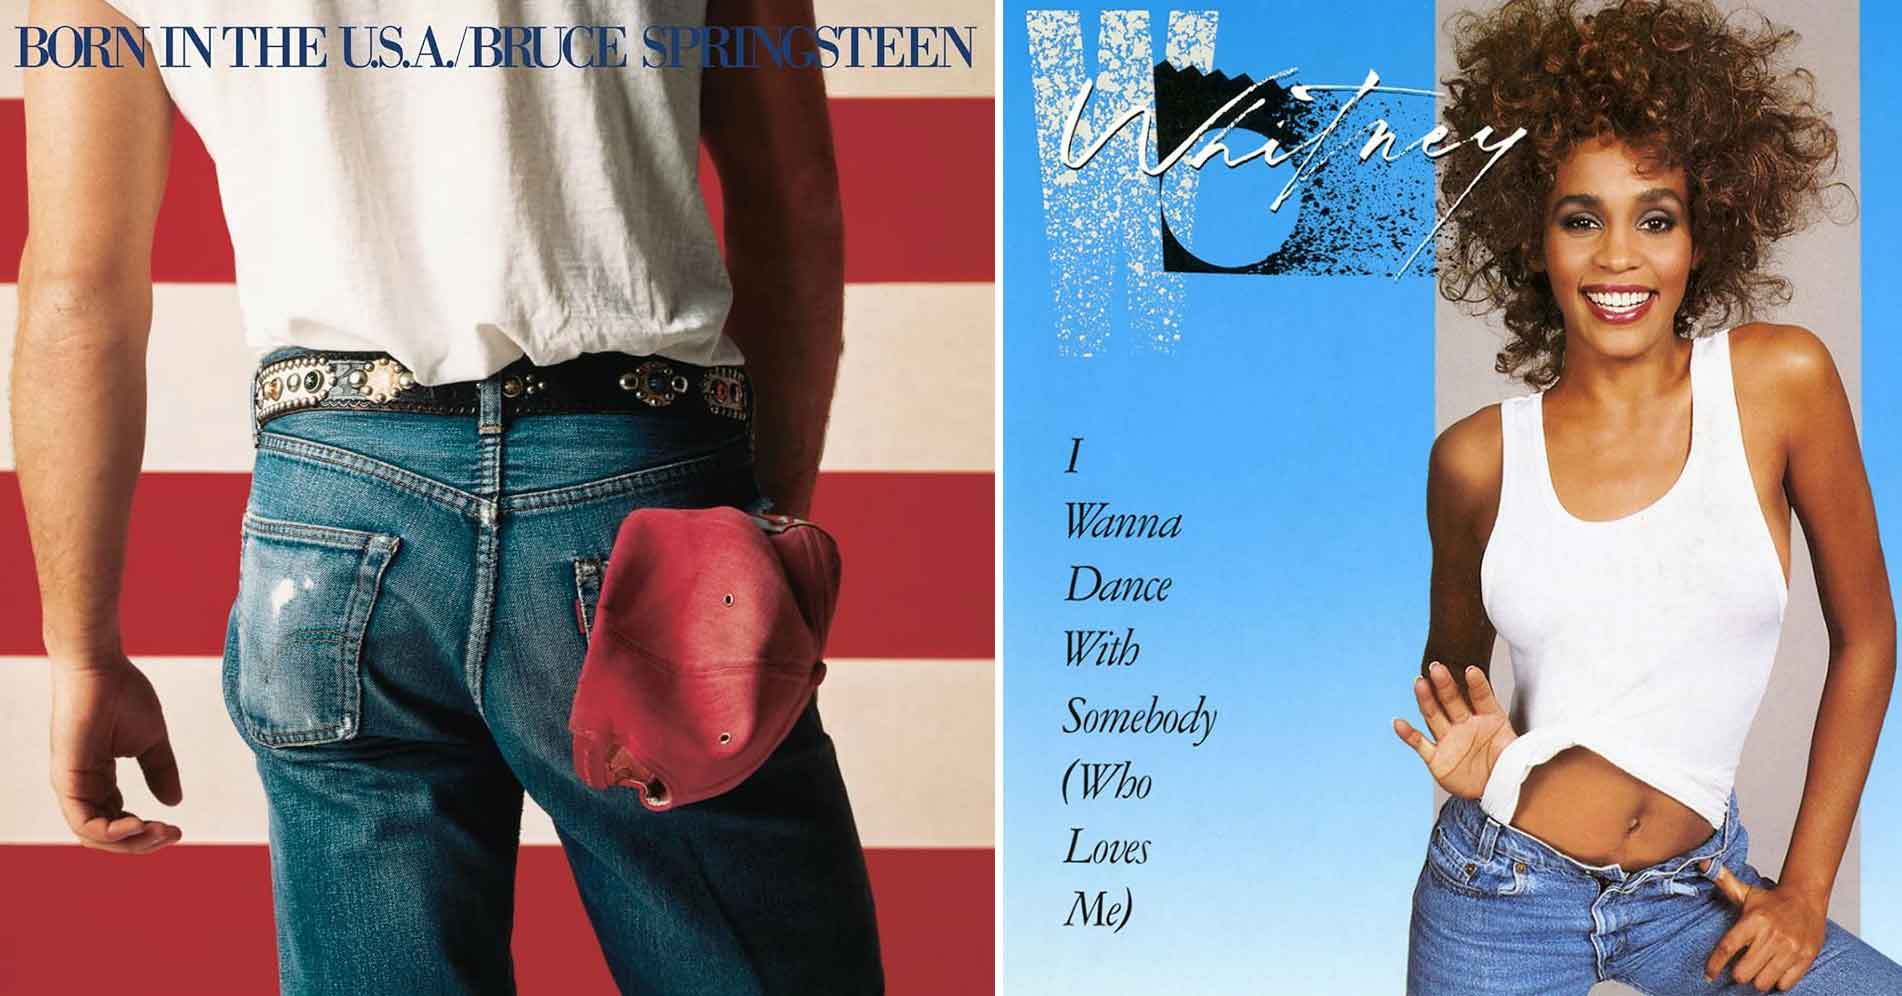 The image shows two album covers. The left one, "Born in the USA" by Bruce Springsteen, features someone in jeans holding a red cap with their back to the camera in front of an American flag. The right one, "Whitney" by Whitney Houston, shows her smiling in a white tank top and jeans.